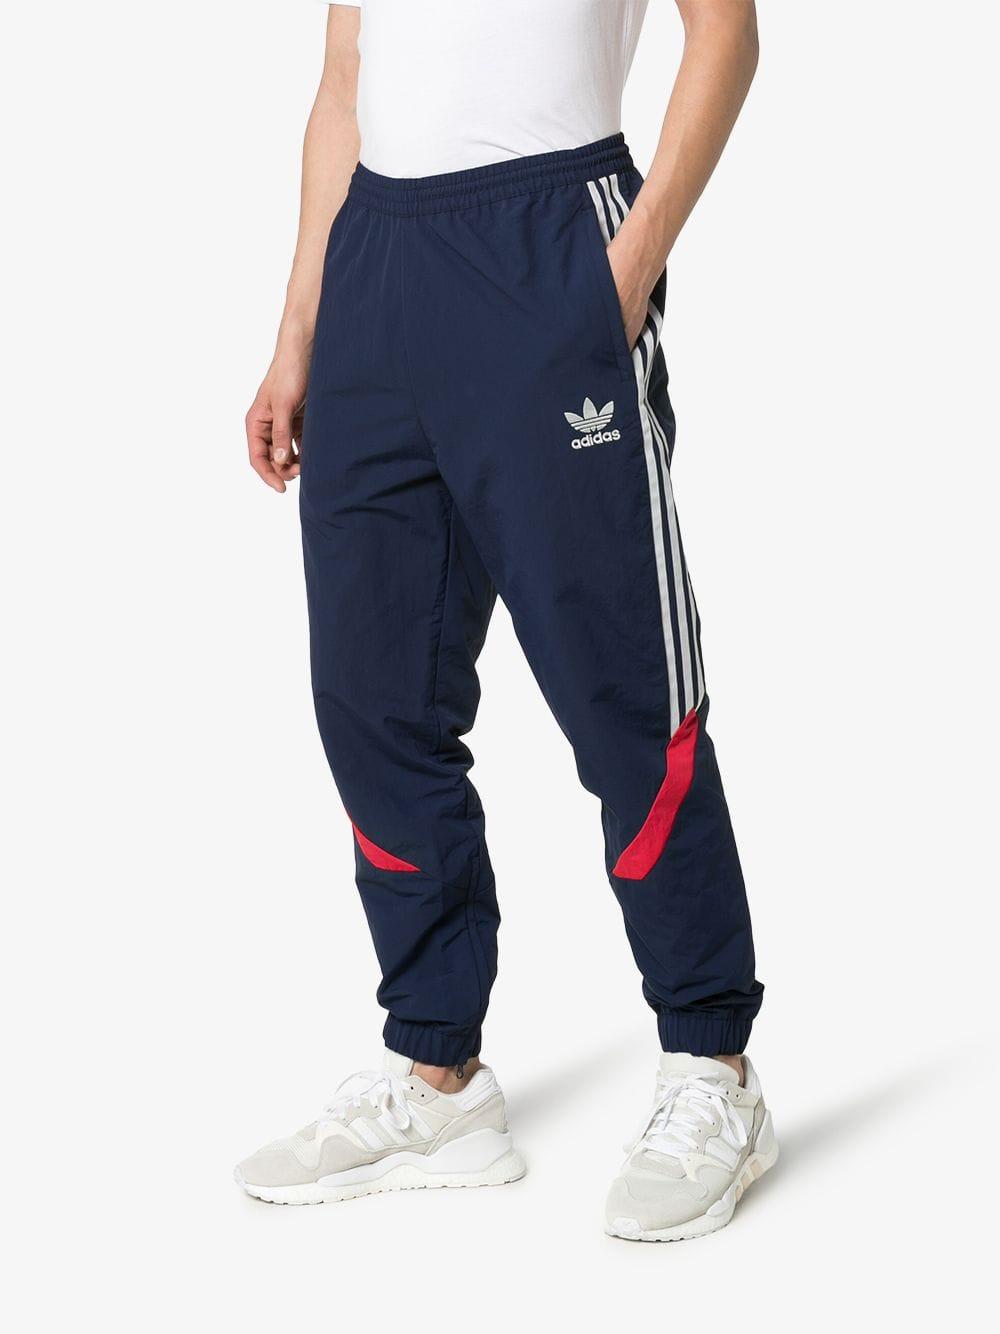 adidas Sportive Red Stripe Track Pants in Blue for Men - Lyst